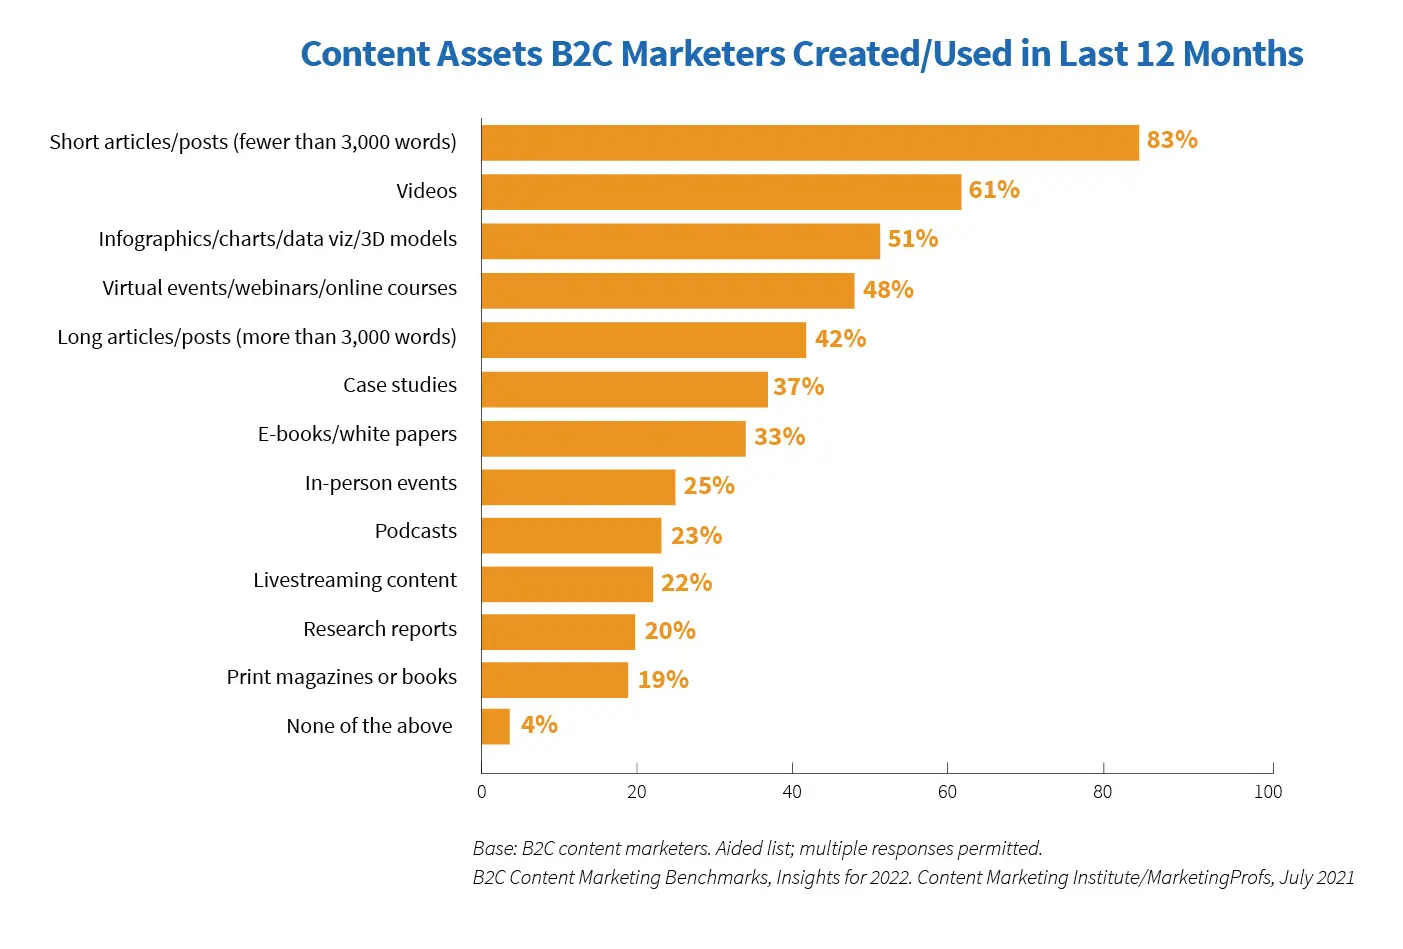 most popular assets used in content marketing